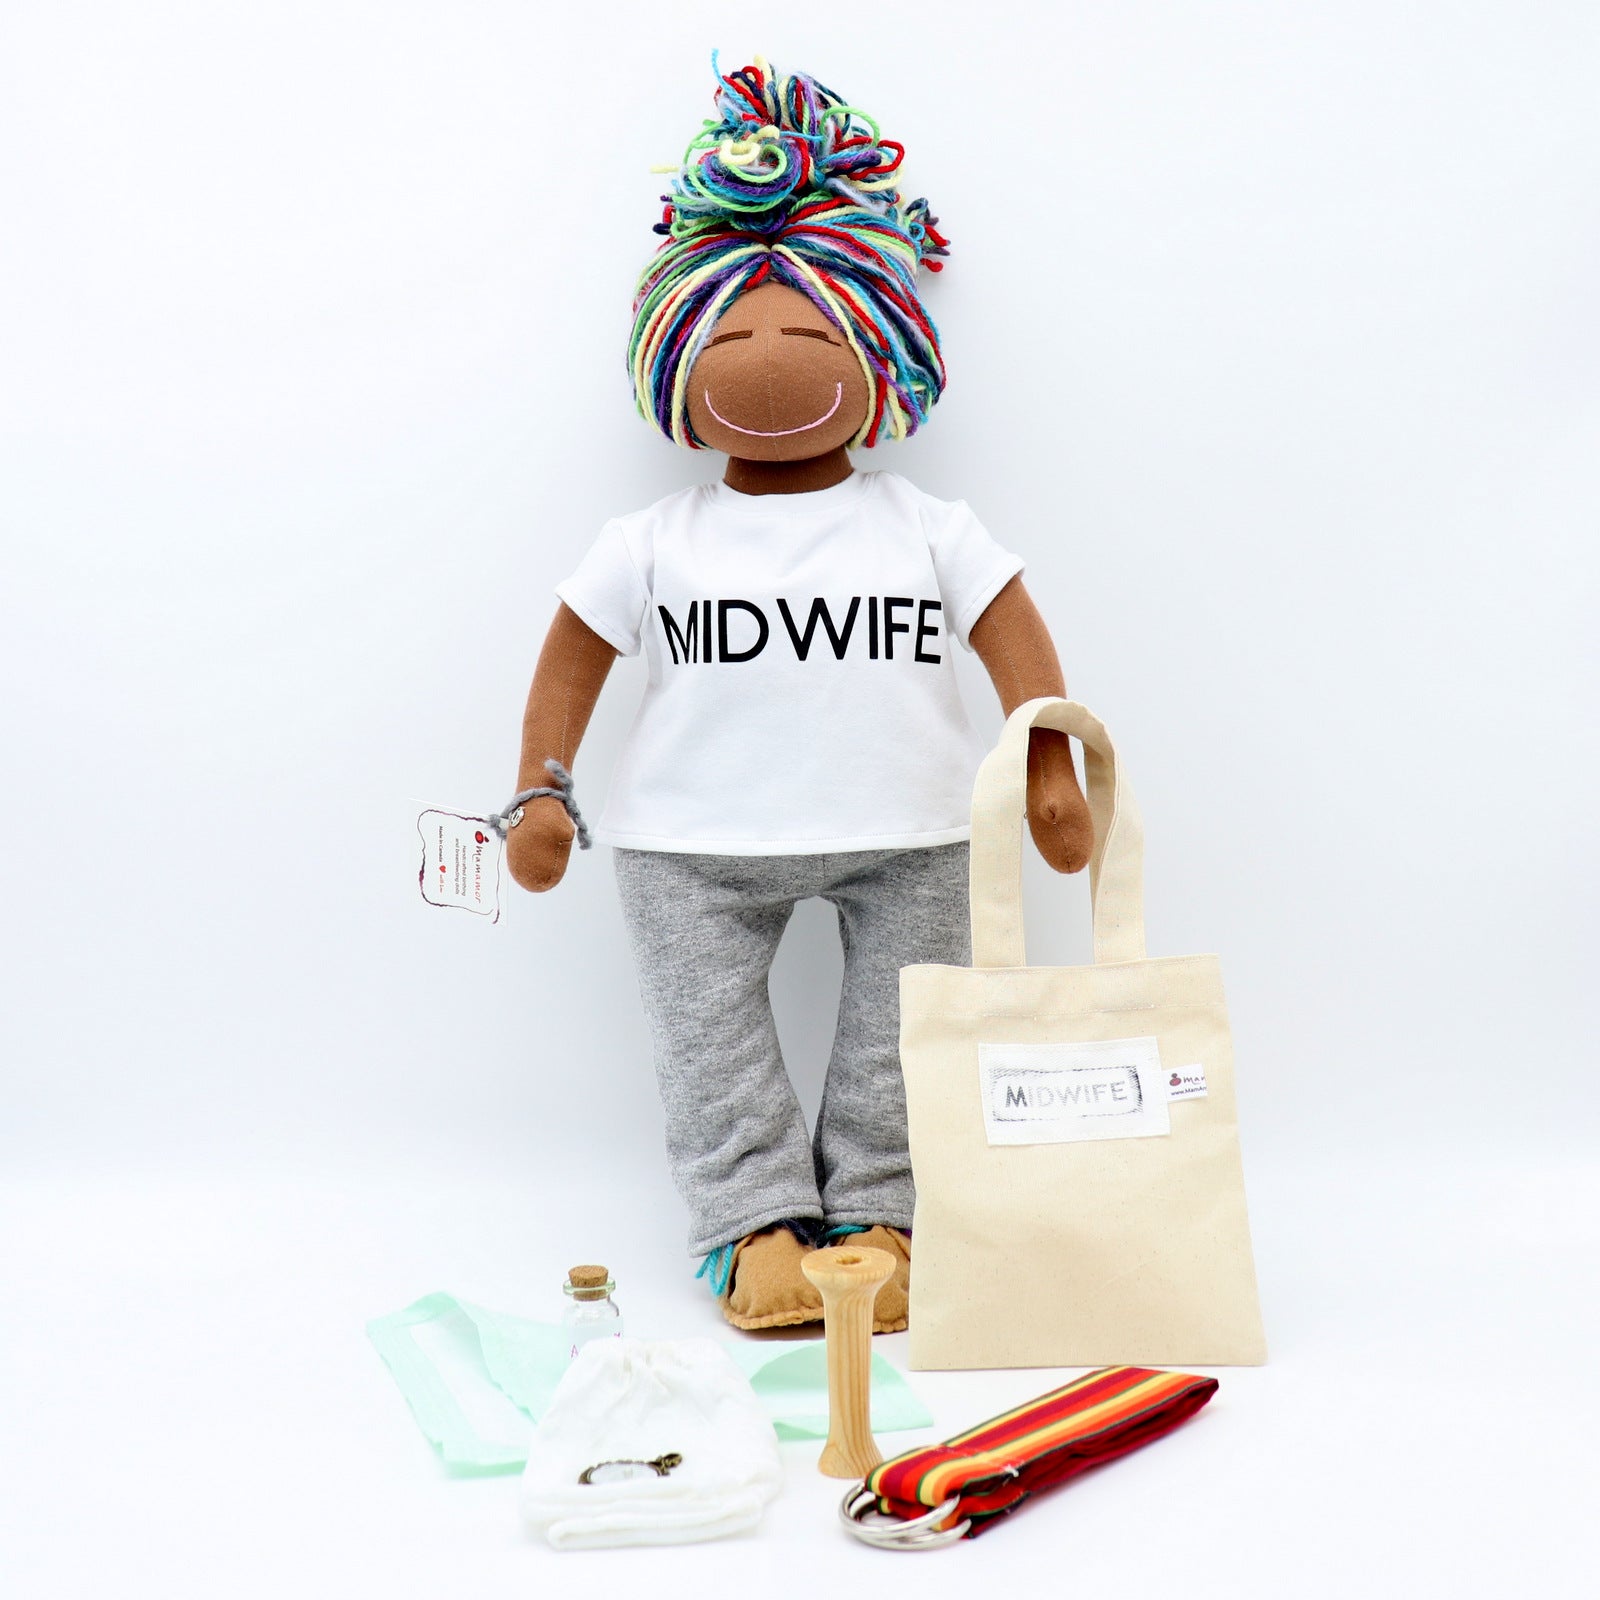 Midwife Doll + Accessories (Option 2)